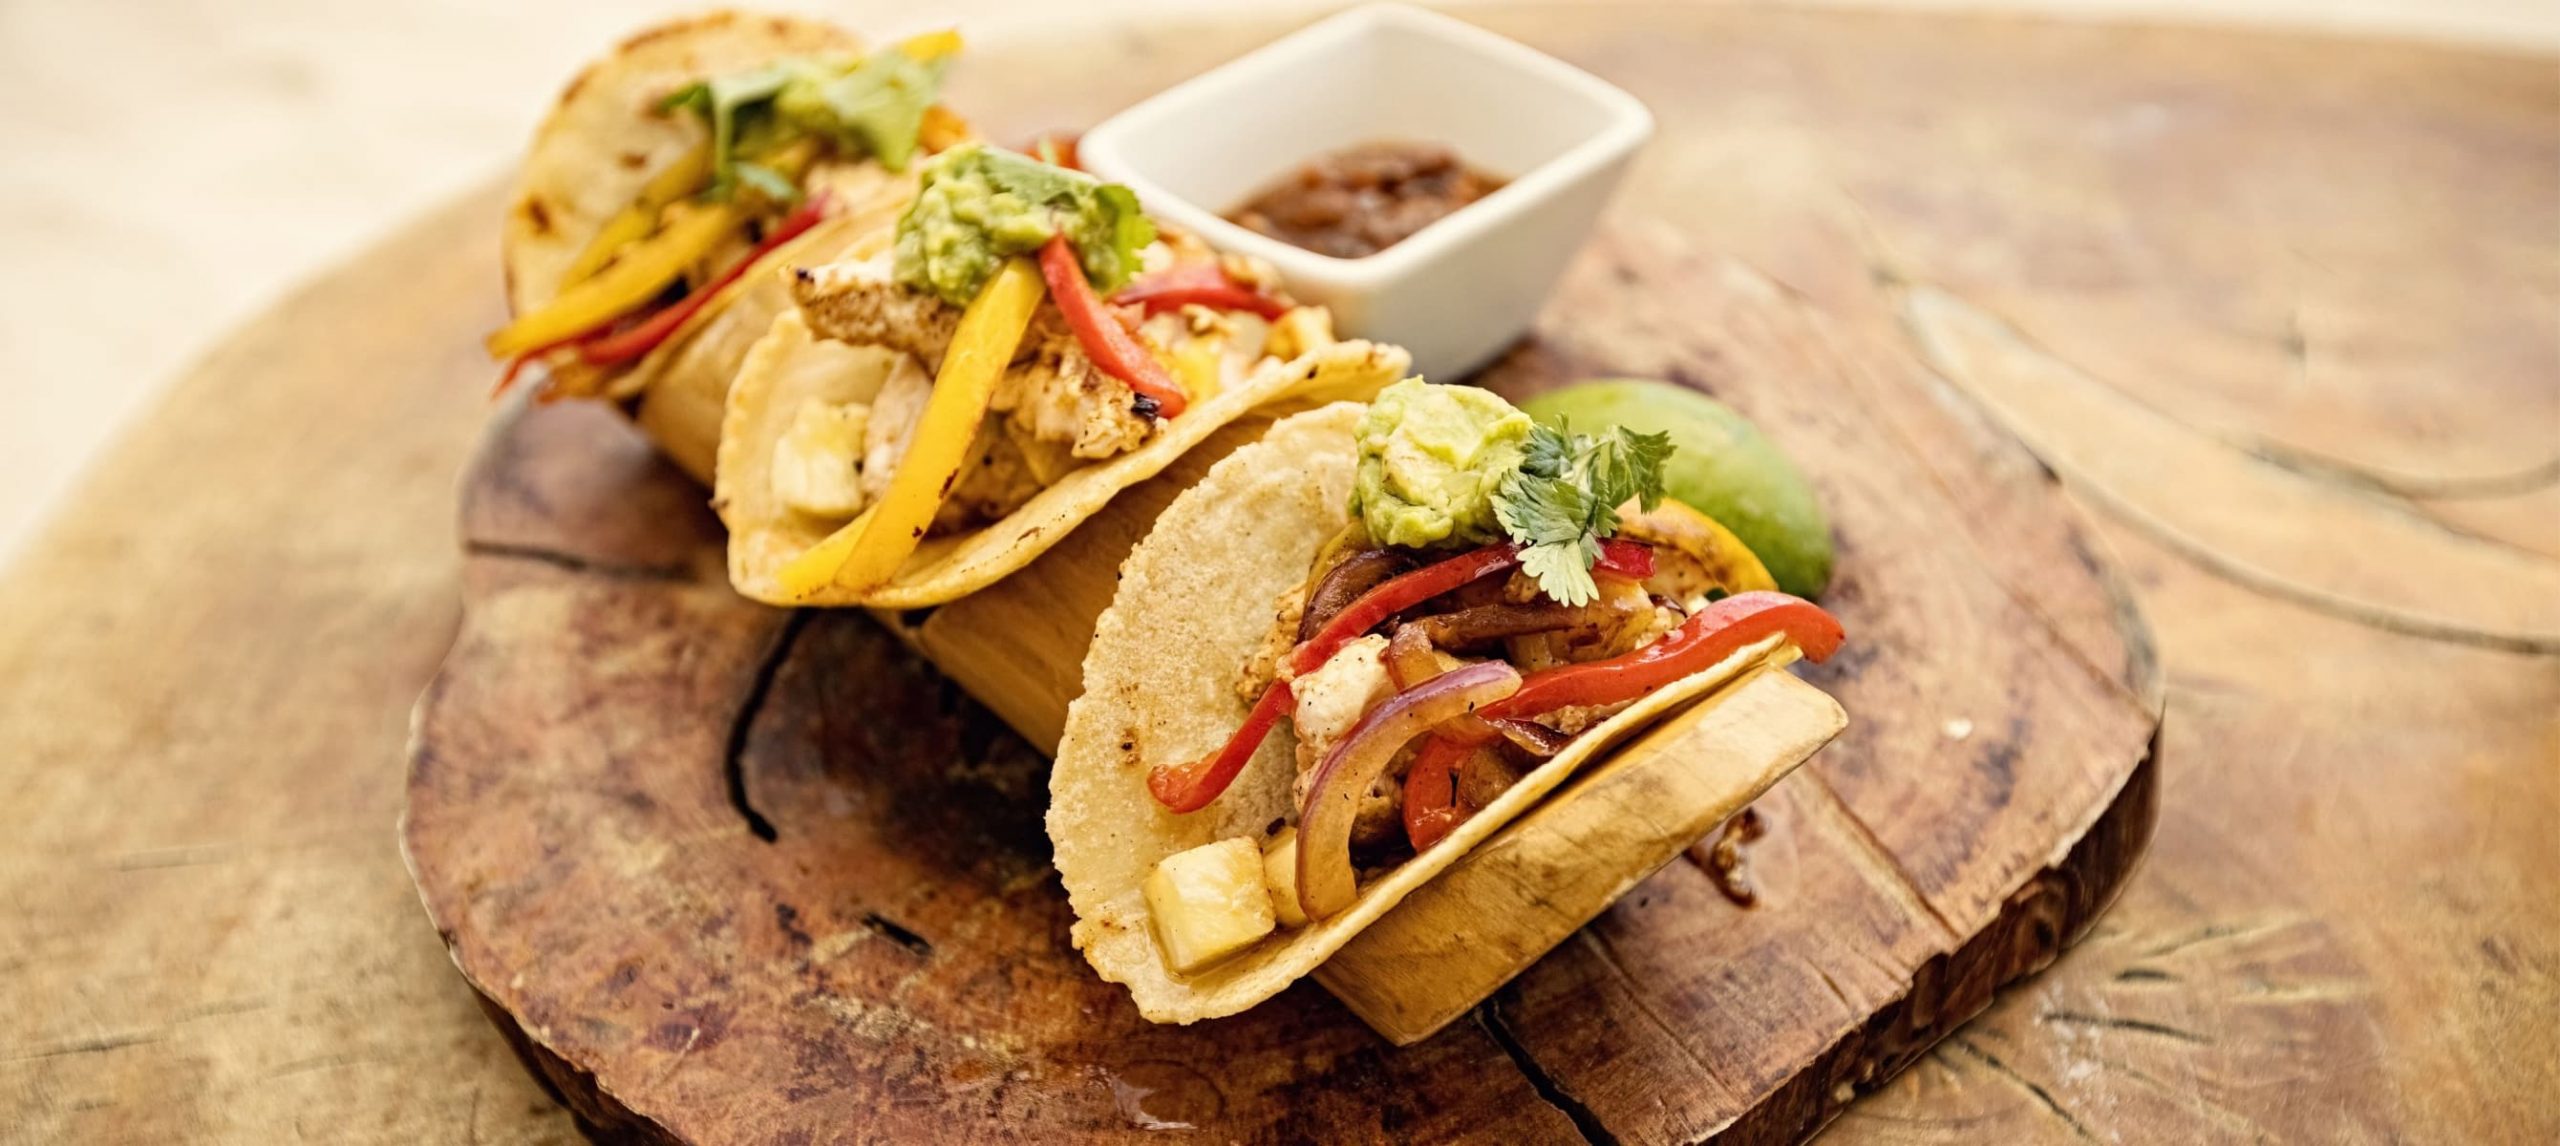 Tacos on a wooden plate